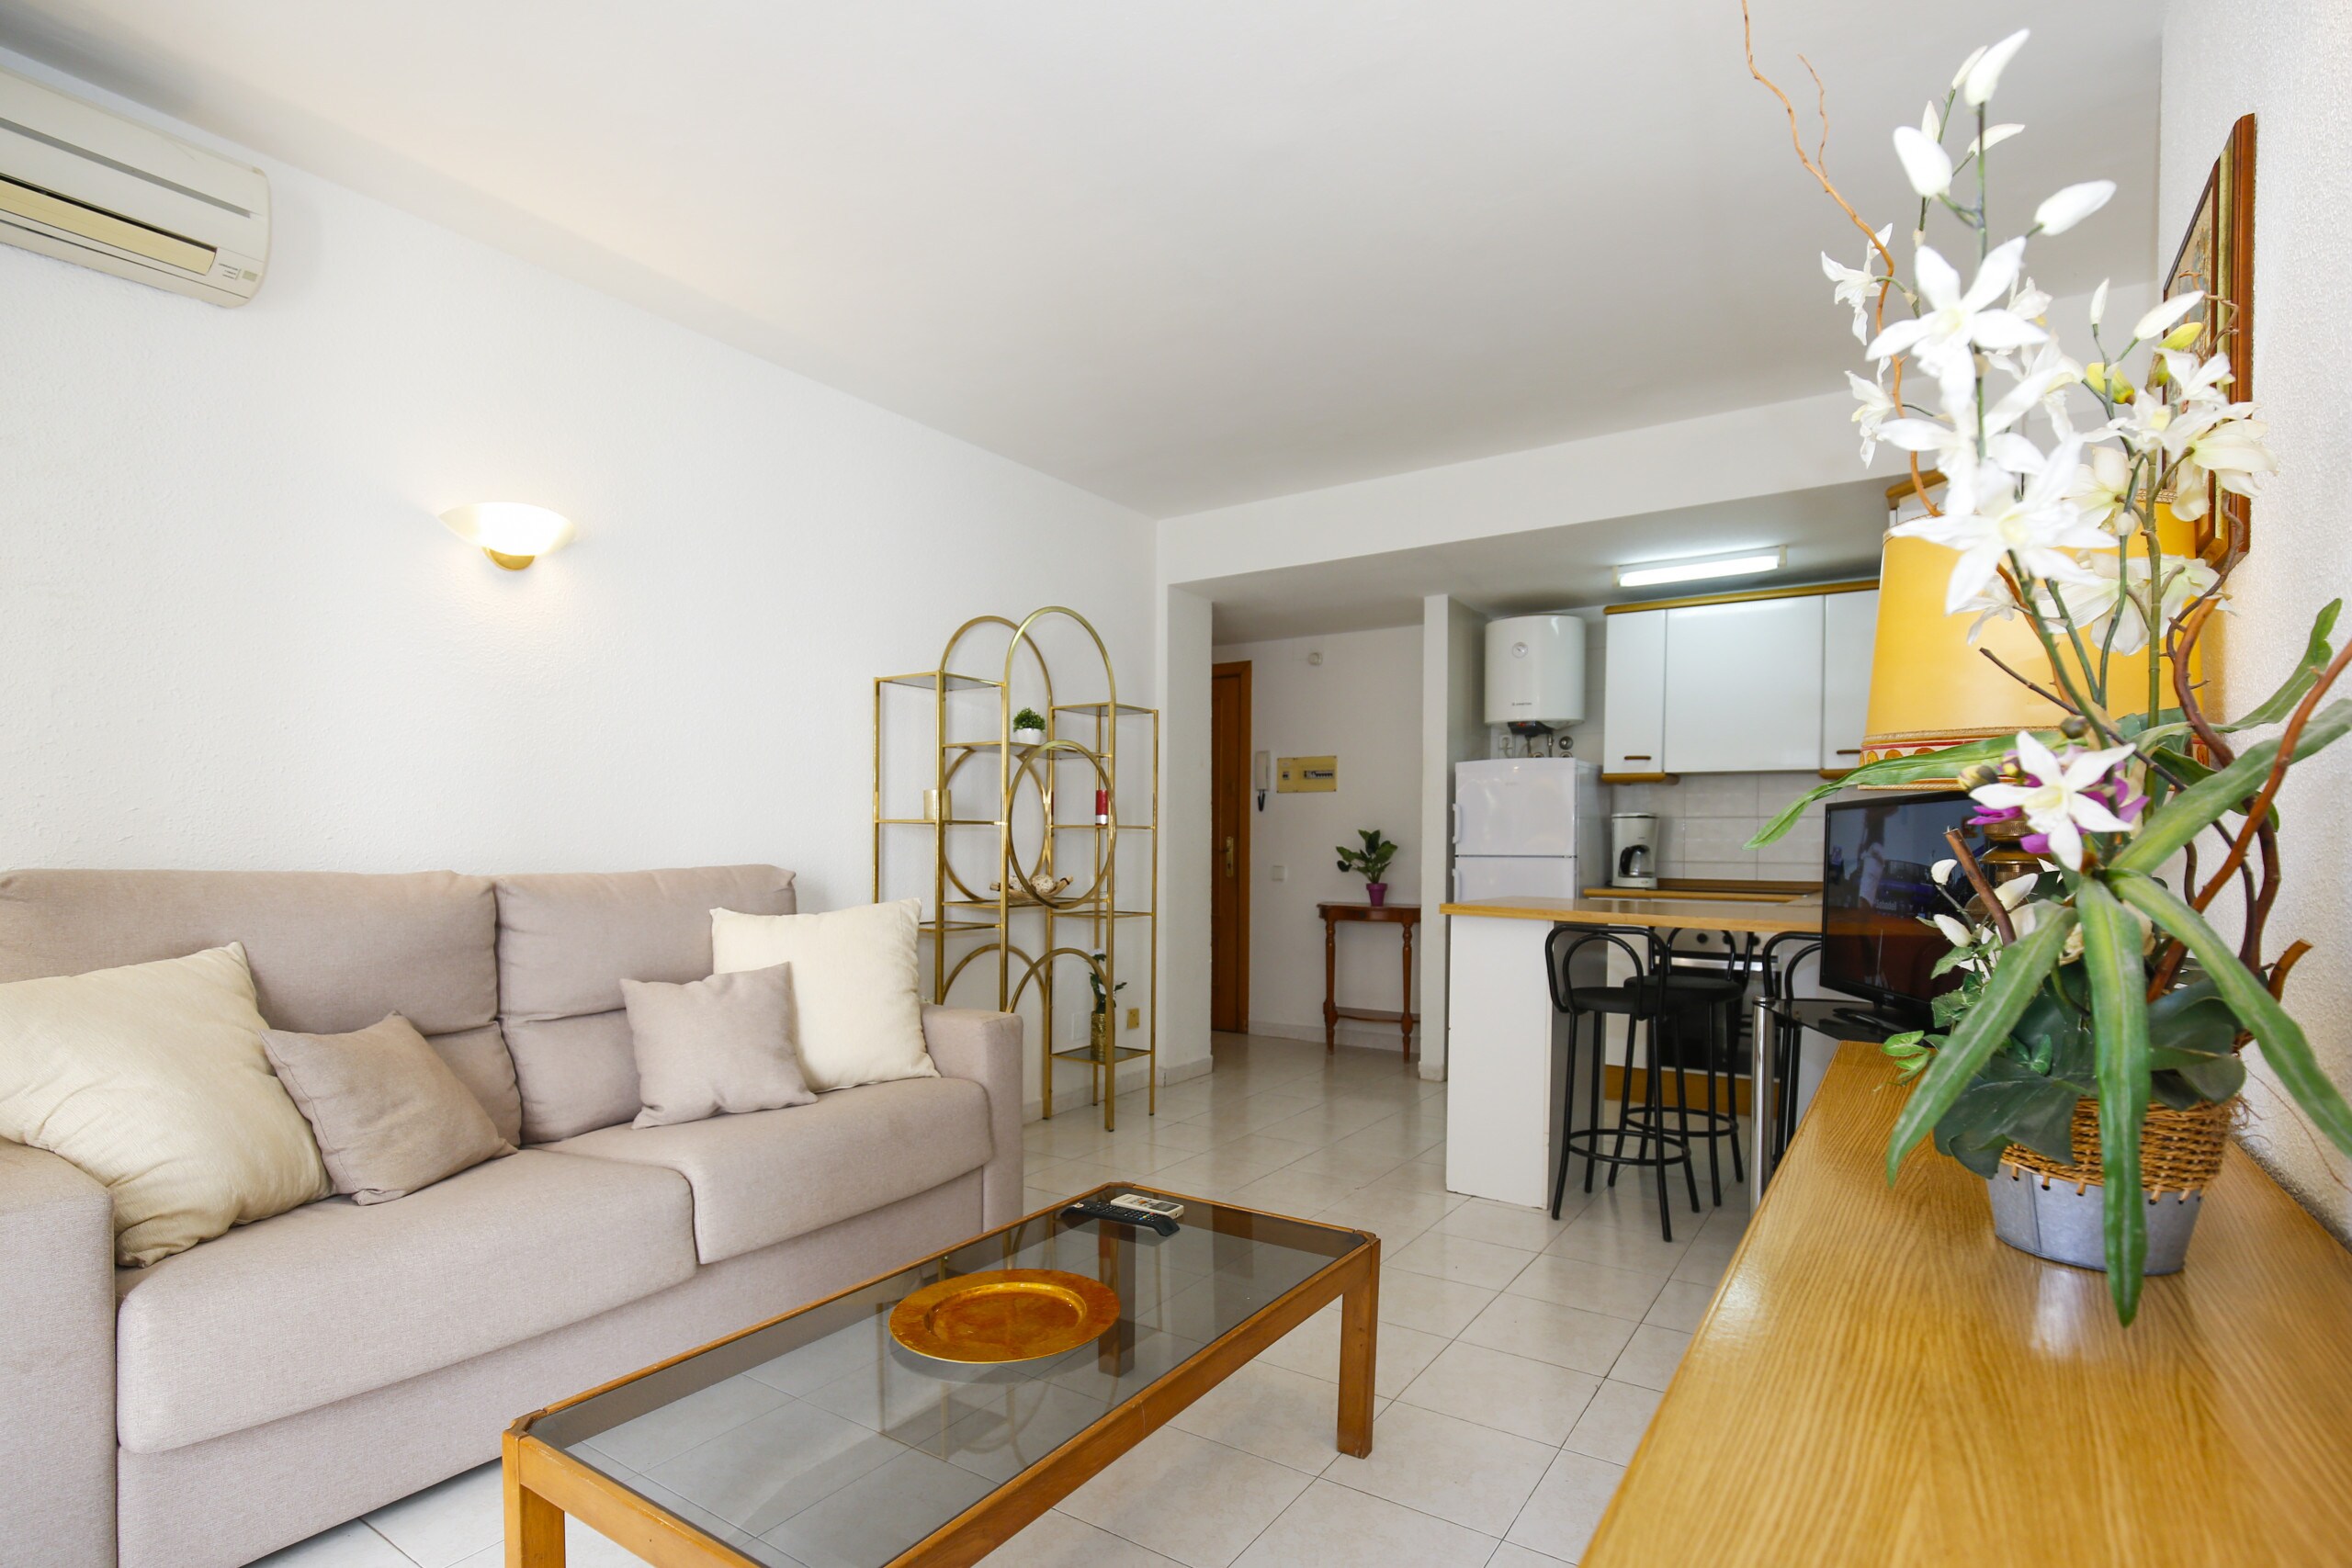 Property Image 2 - Lovely apartment located 50m from the beach in Cambrils